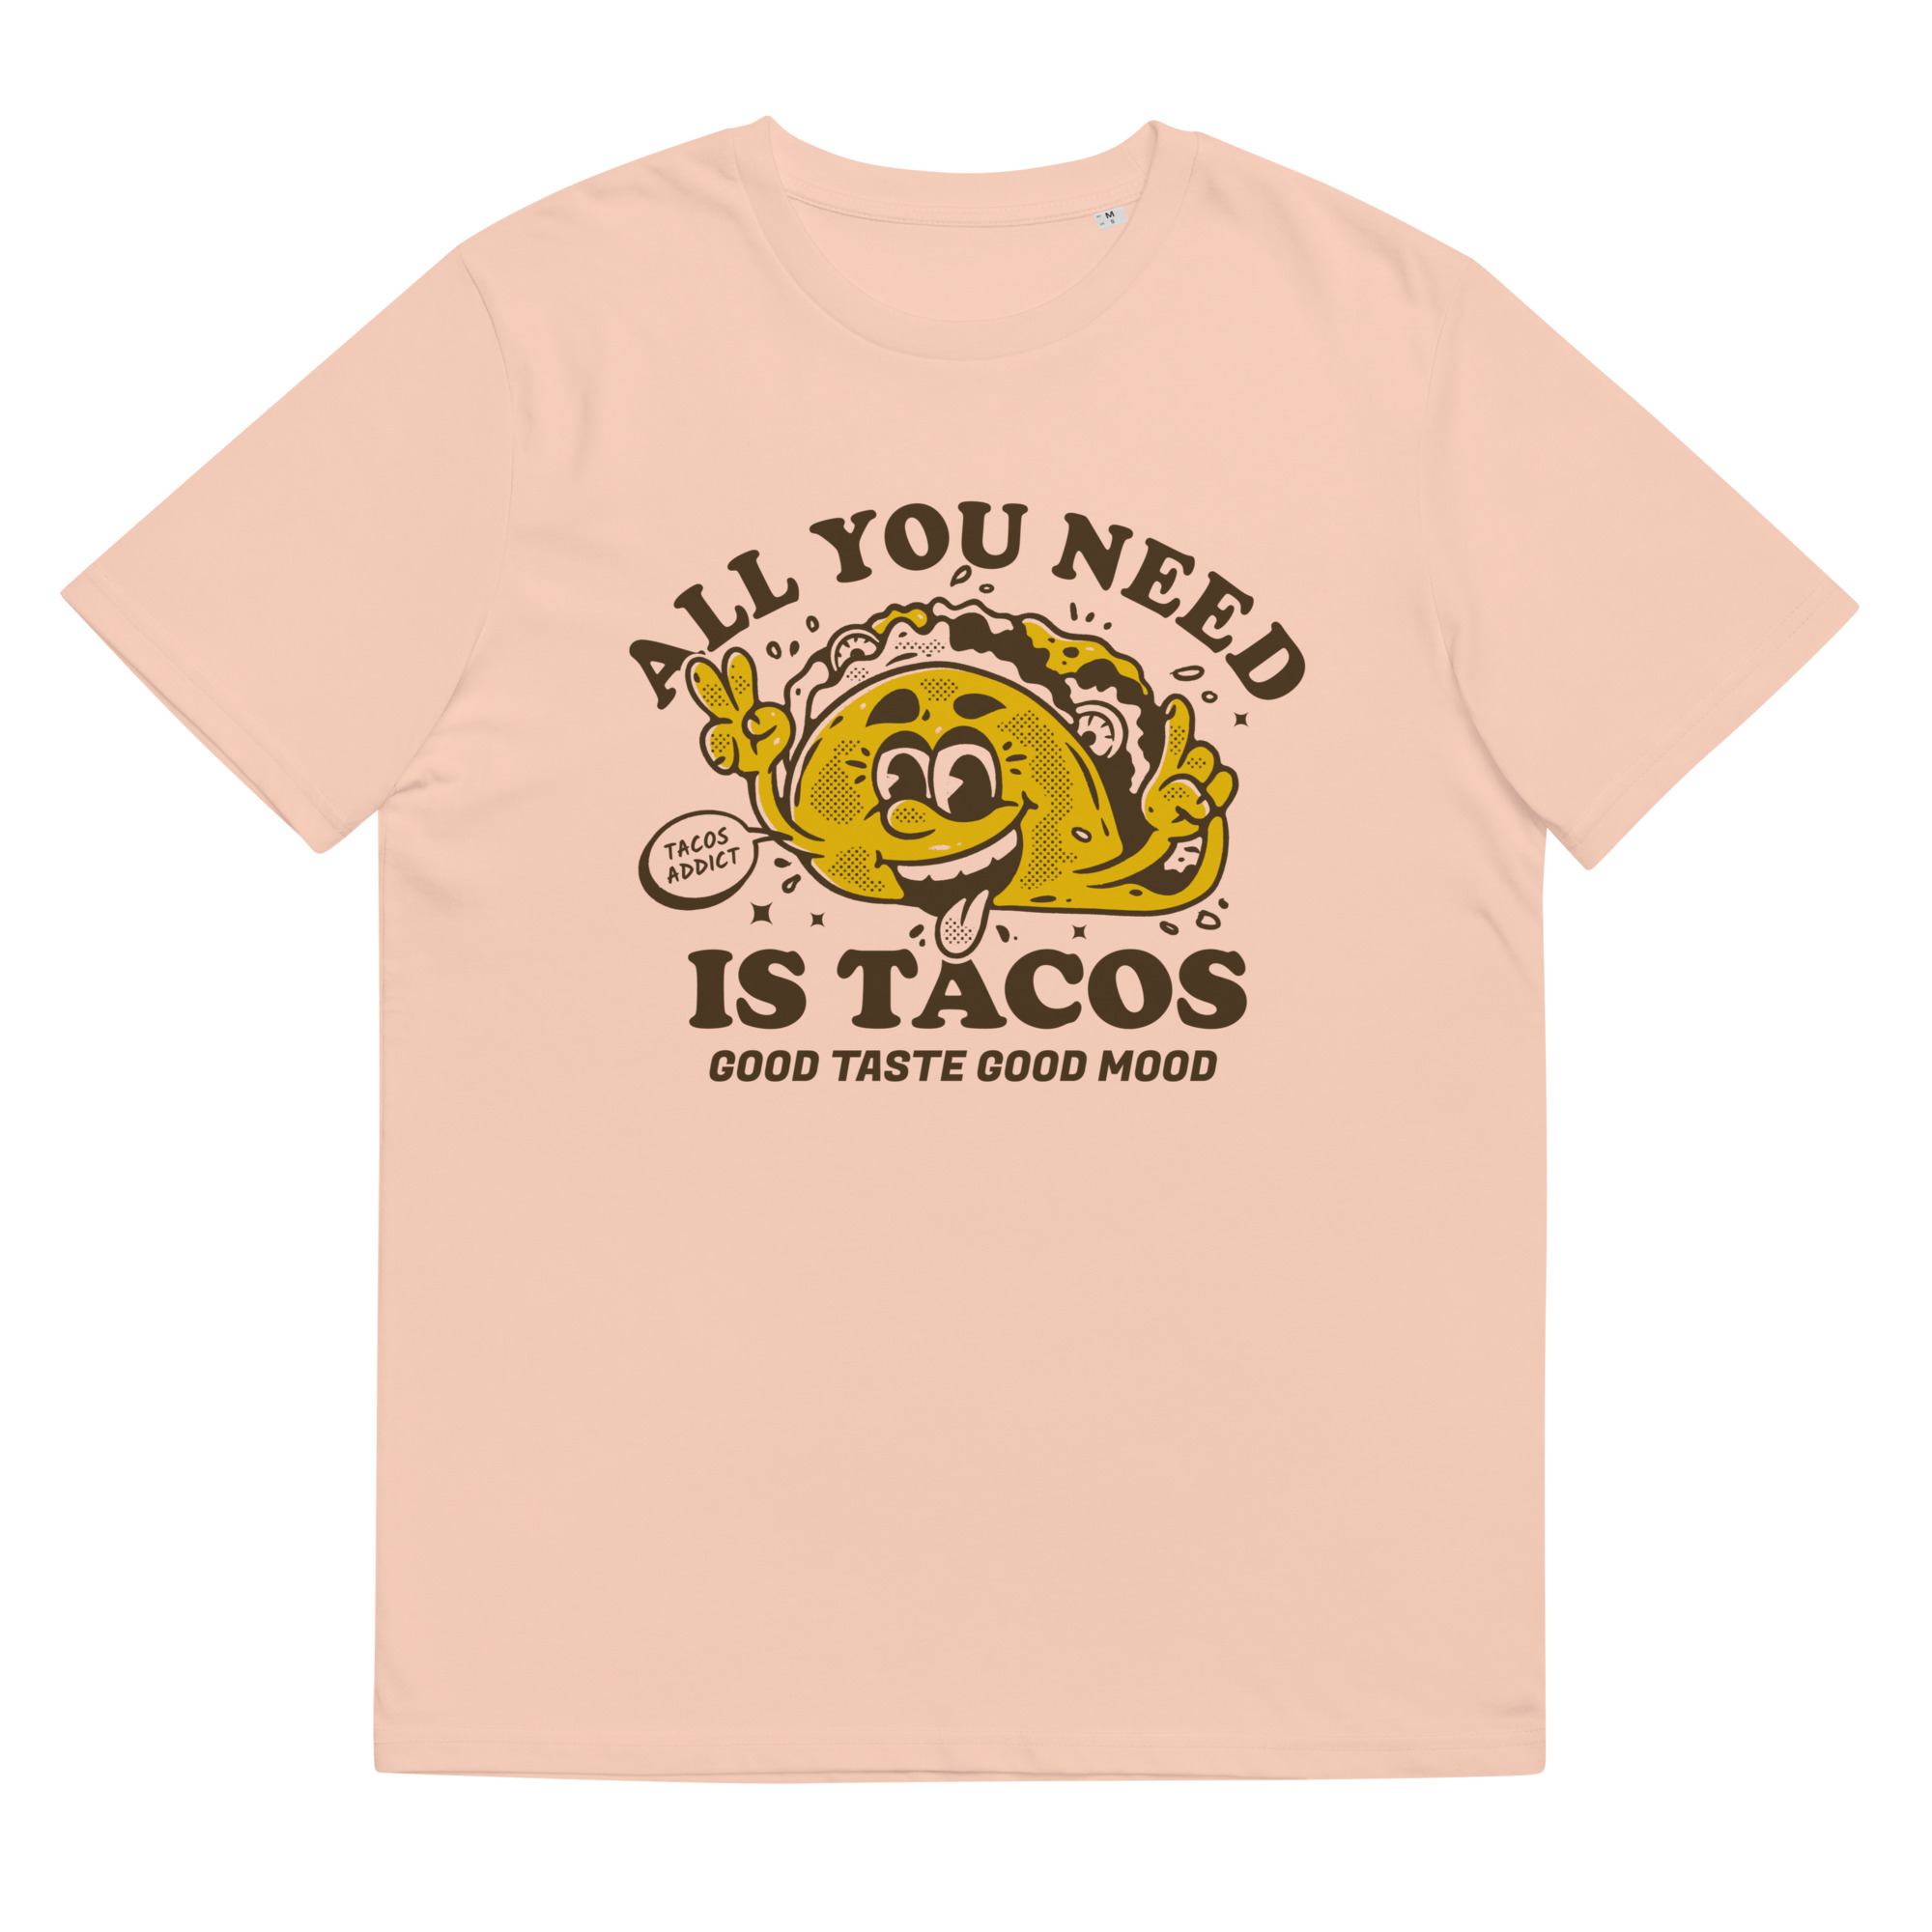 All You Need Is Tacos - Organic Unisex Tacos T-Shirt